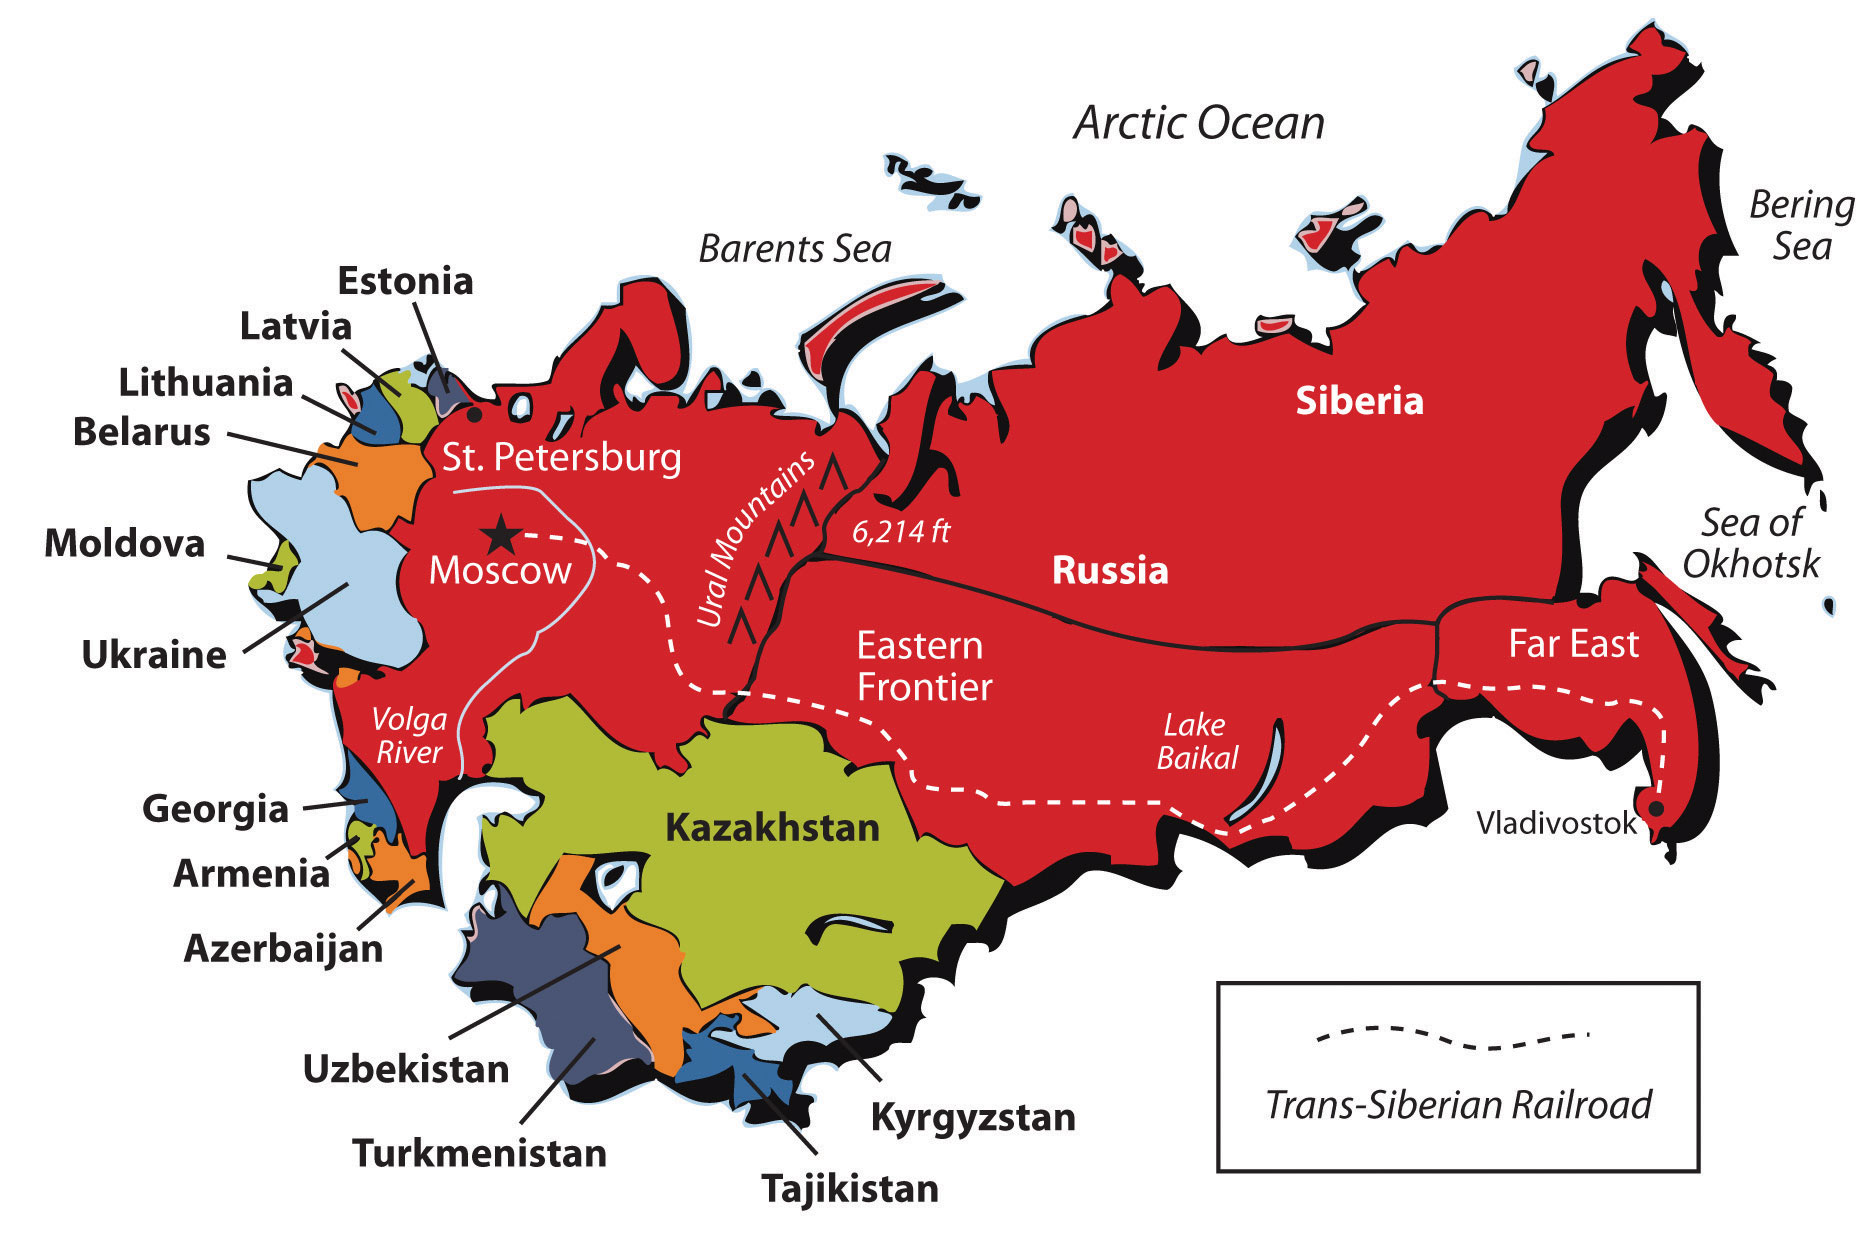 File:Flag-Map of Russia without Autonomous Okrugs and Republics